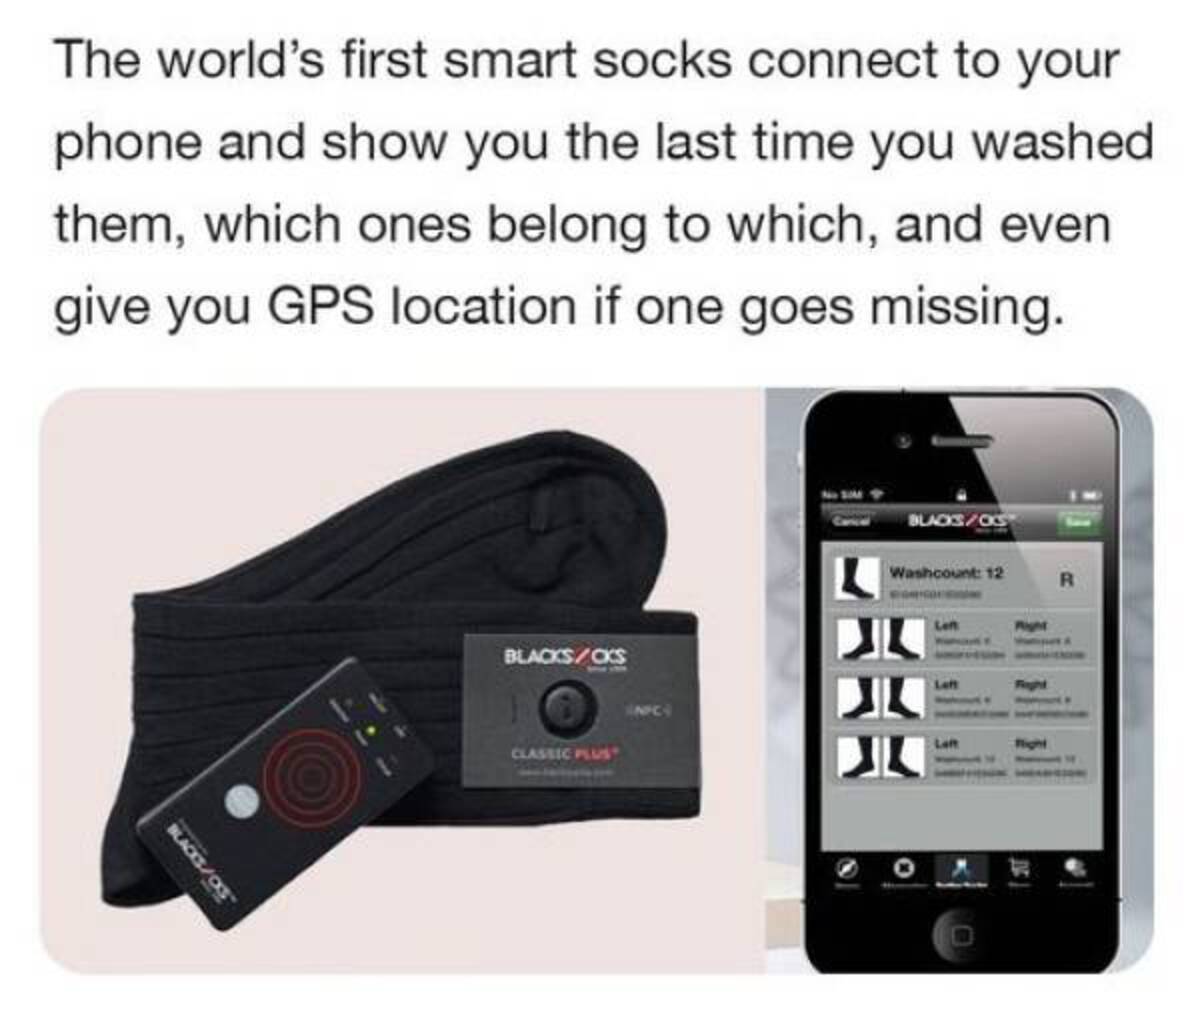 iphone - The world's first smart socks connect to your phone and show you the last time you washed them, which ones belong to which, and even give you Gps location if one goes missing. BlacksOxs BlacksCks Classic Plus BlacksOcs Washcount 12